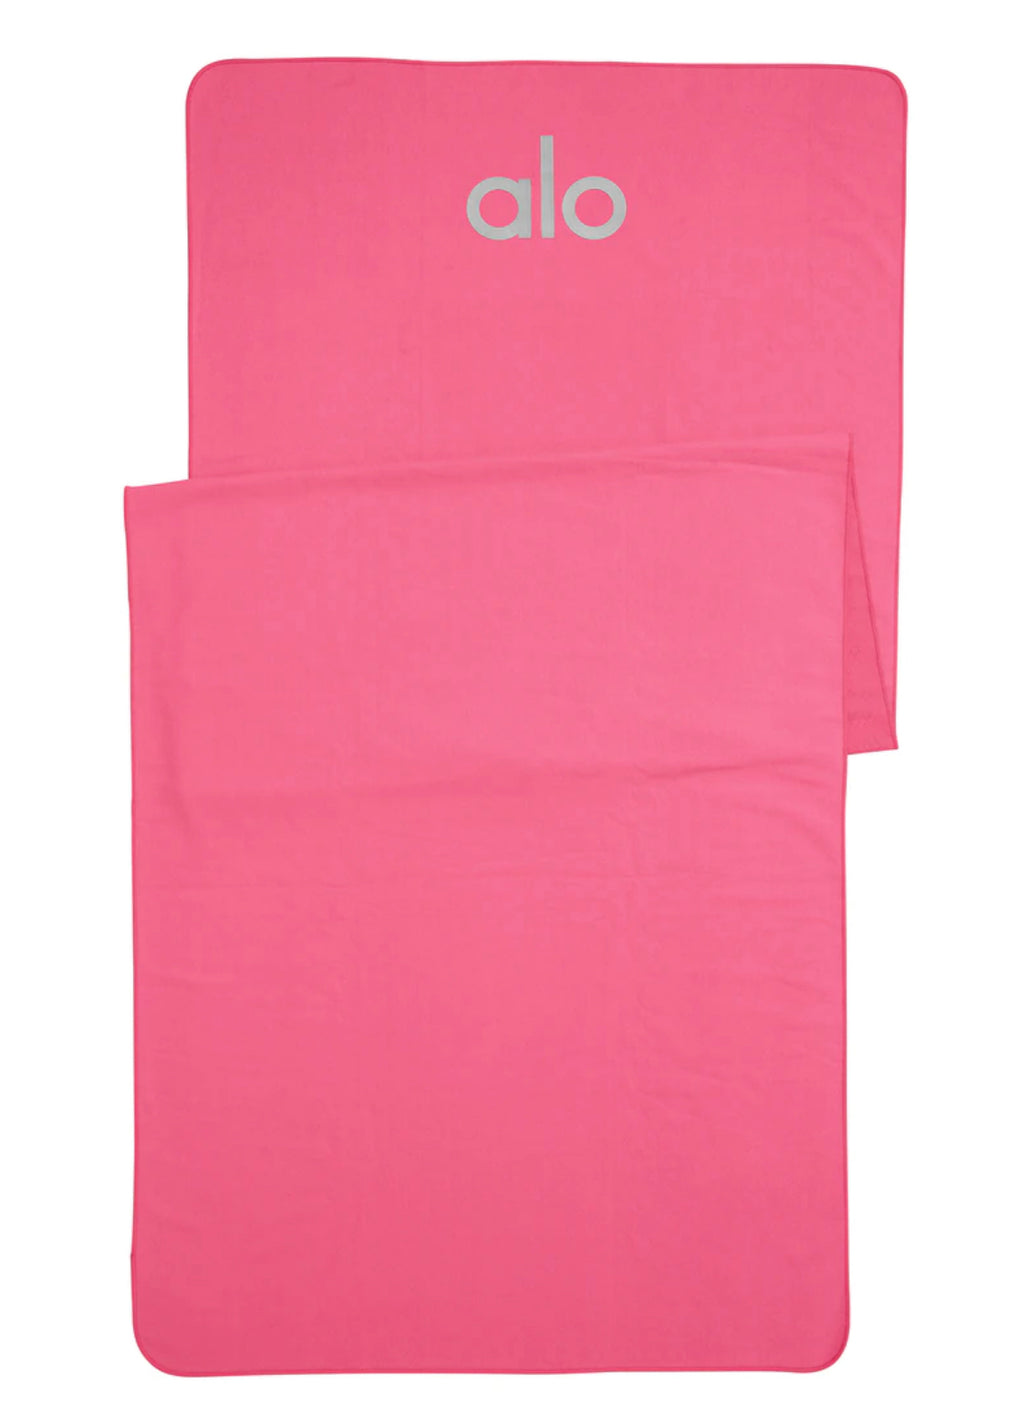 ALO A0029U GROUNDED NO-SLIP MAT TOWEL- HOT PINK